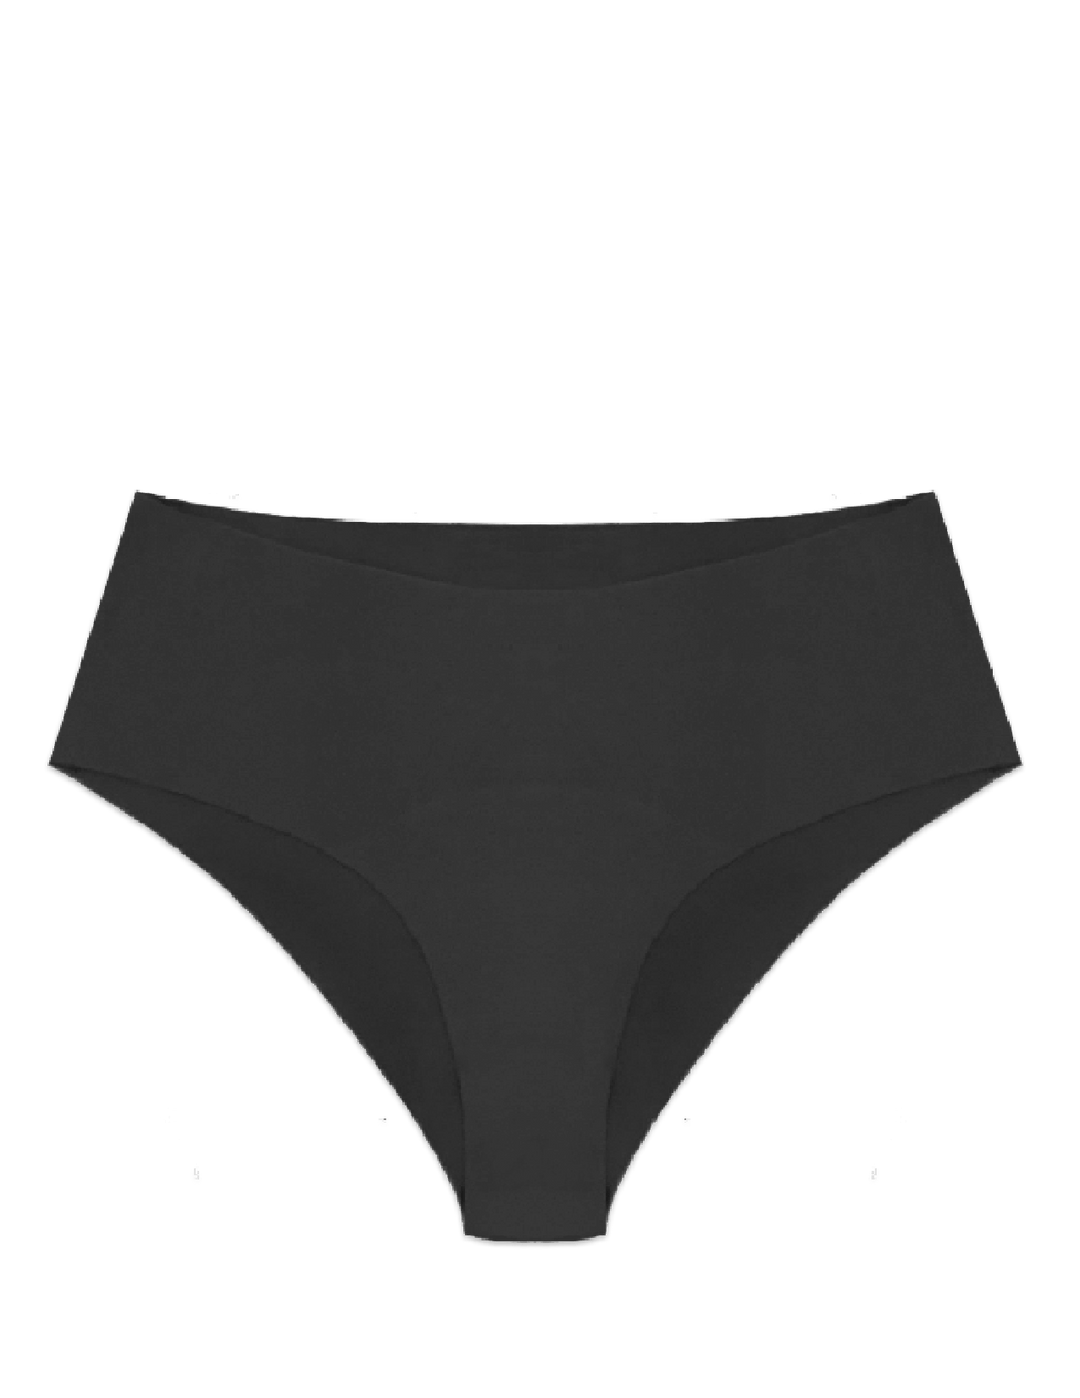 Panty Promise Briefs Black / S Panty Promise Everyday Organic Cotton Hipster